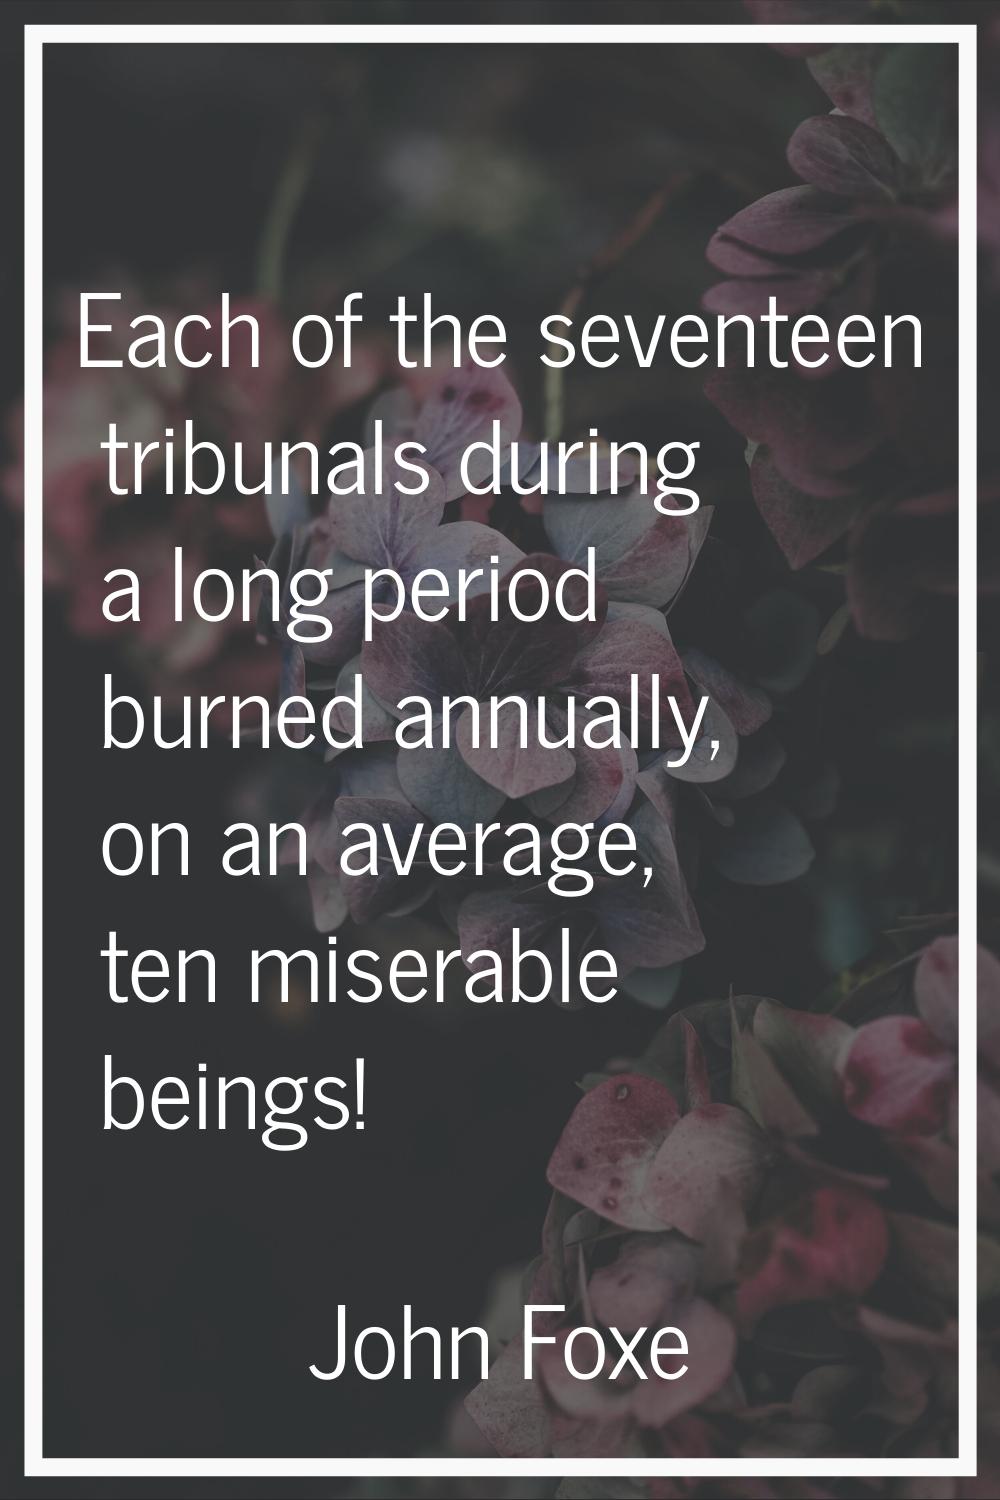 Each of the seventeen tribunals during a long period burned annually, on an average, ten miserable 